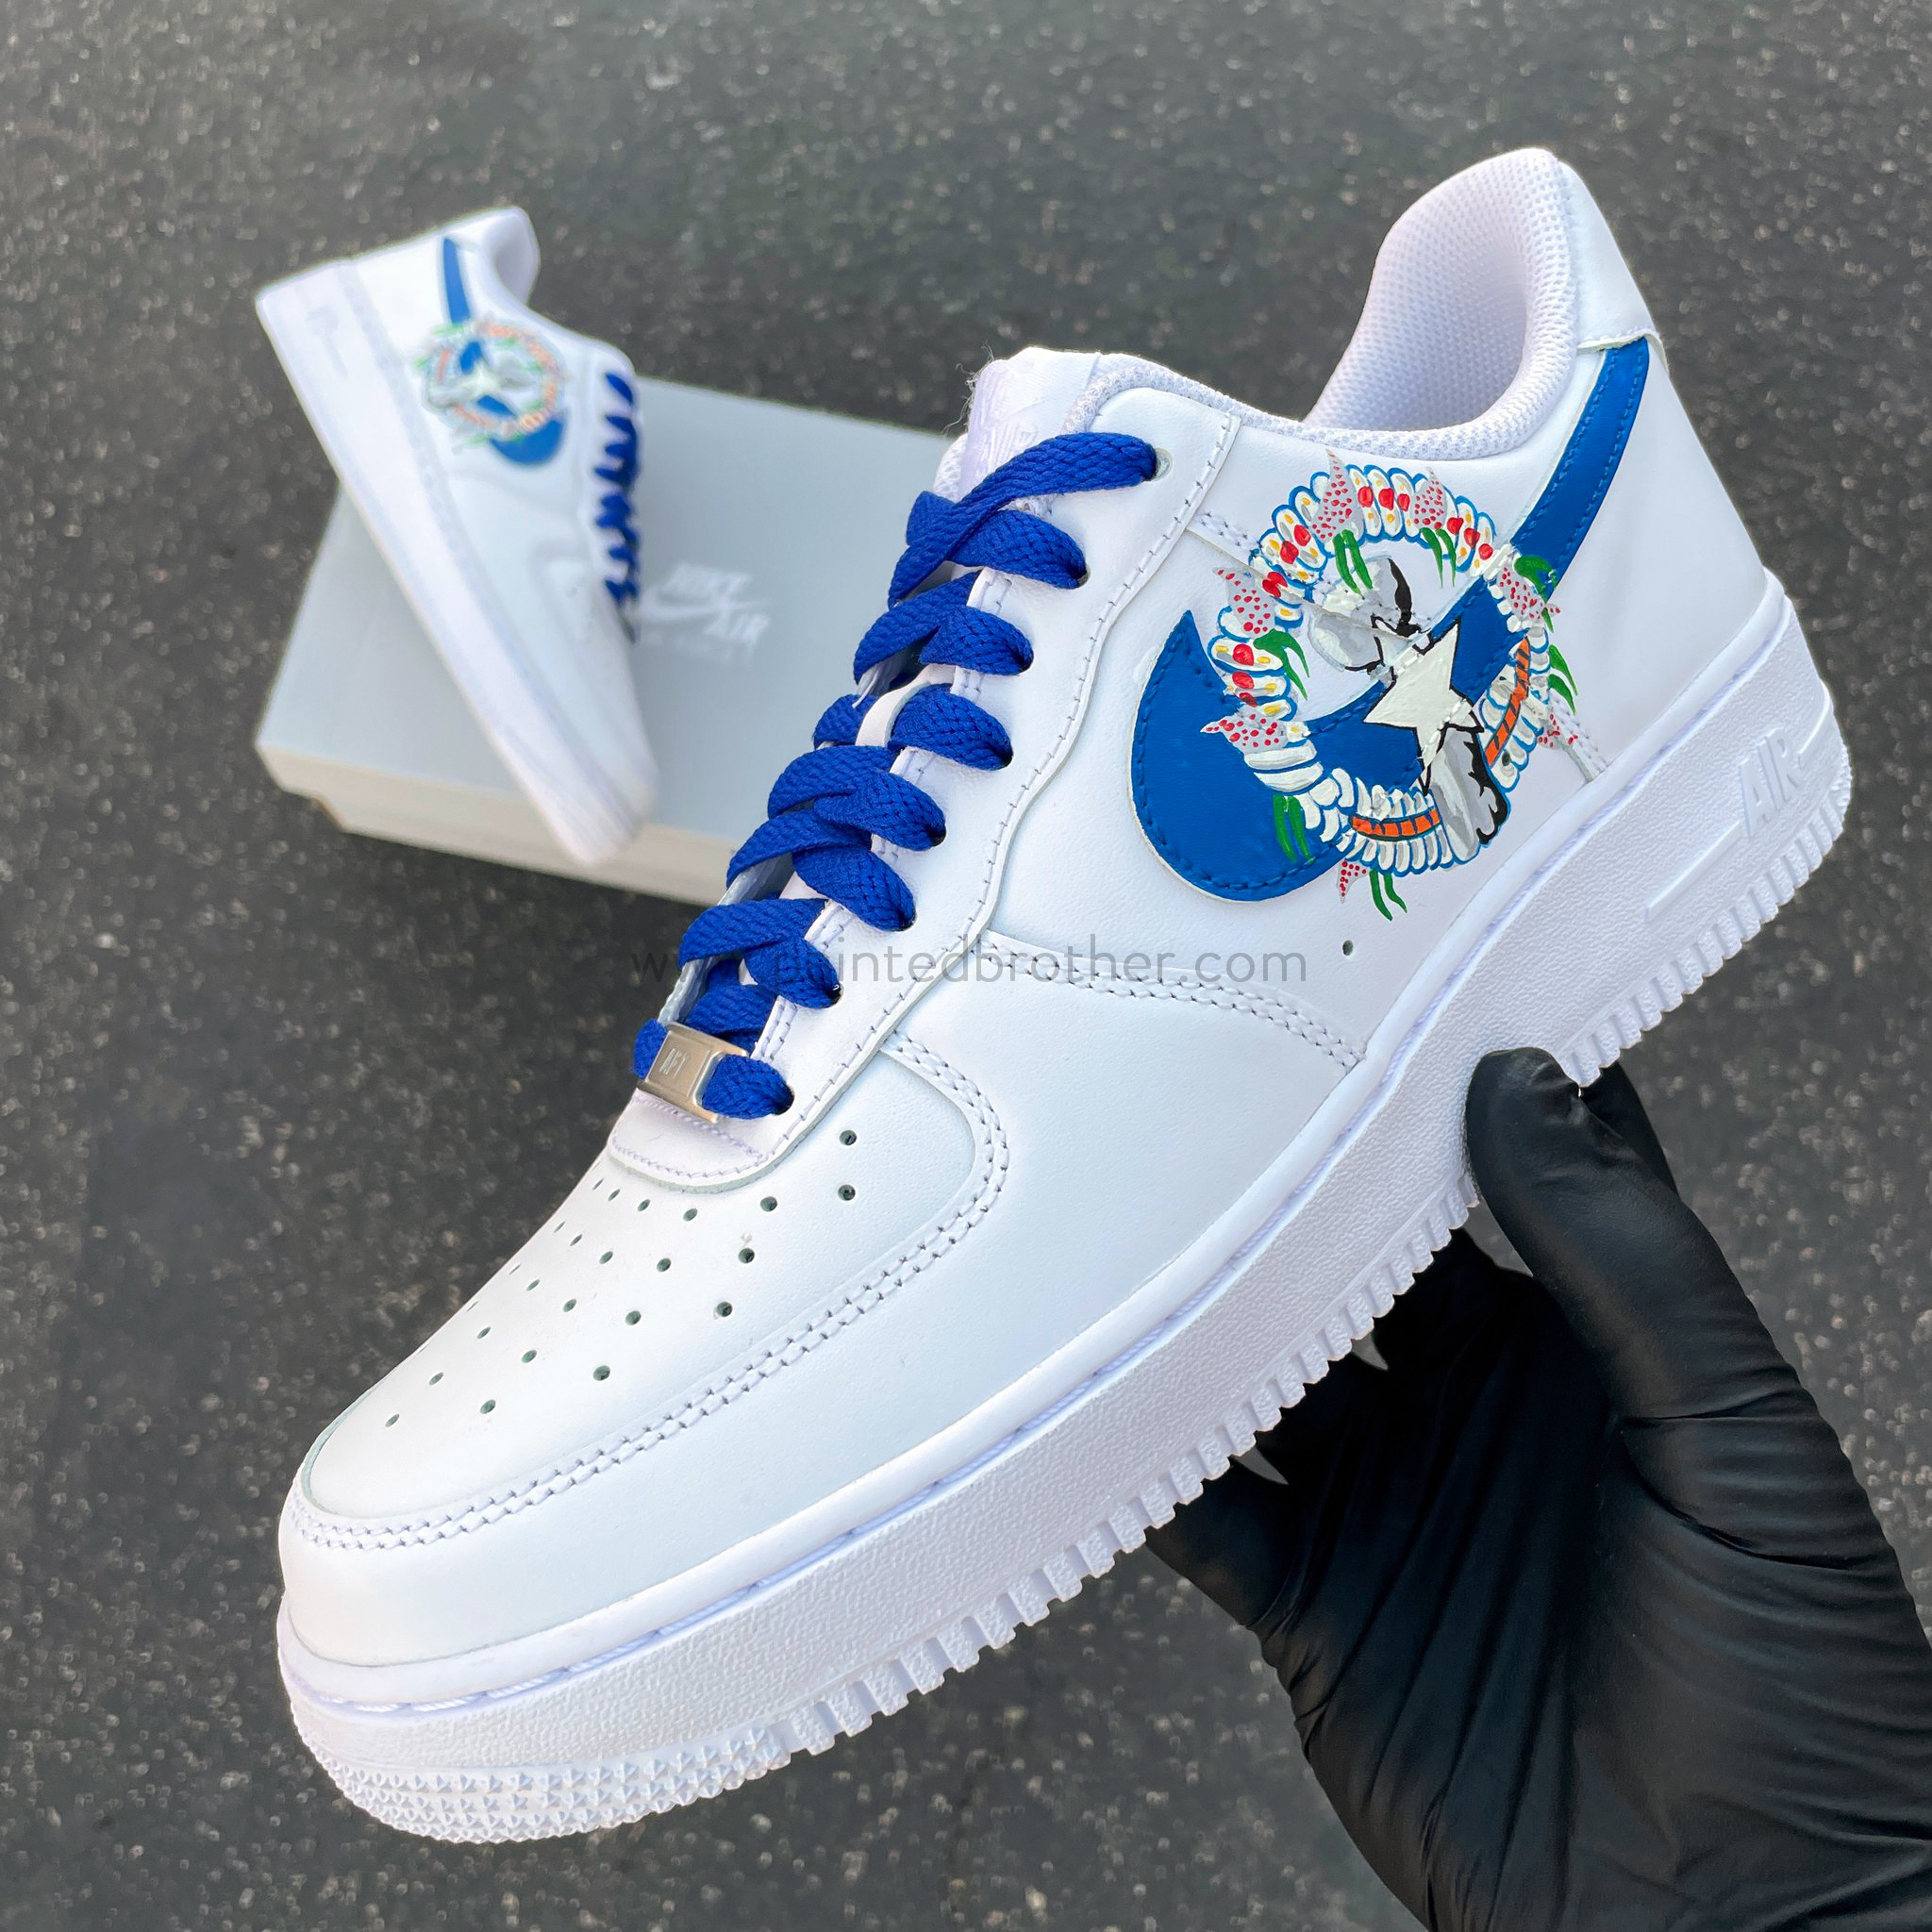 Custom Hand Painted CNMI Northern Mariana Islands Nike Air Force 1 Low-paintedbrother